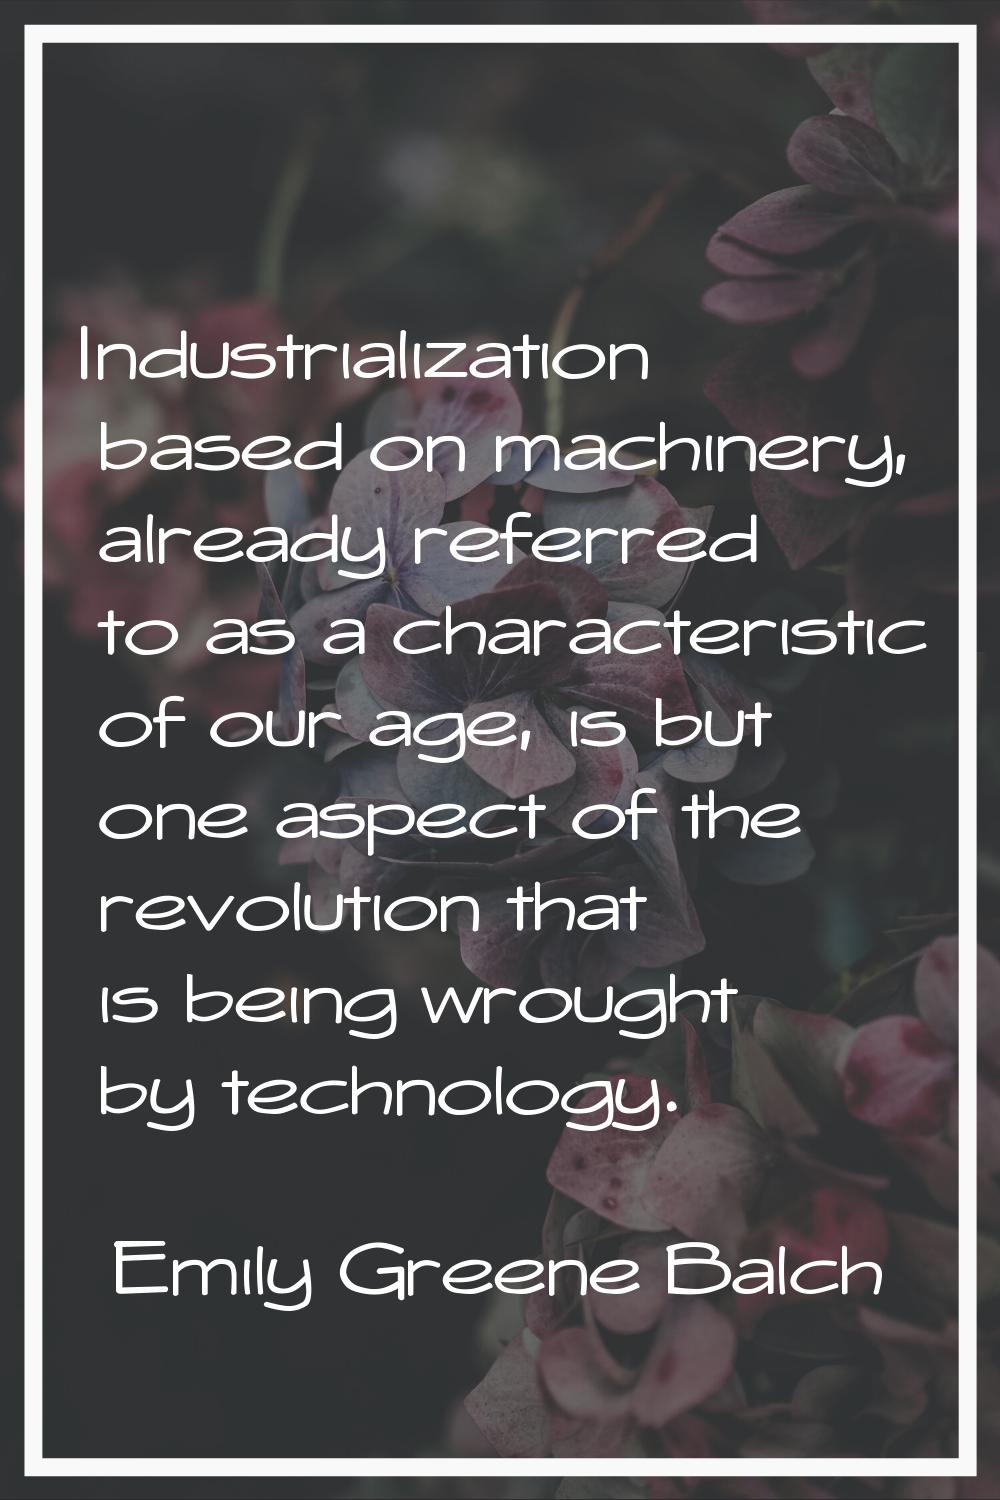 Industrialization based on machinery, already referred to as a characteristic of our age, is but on